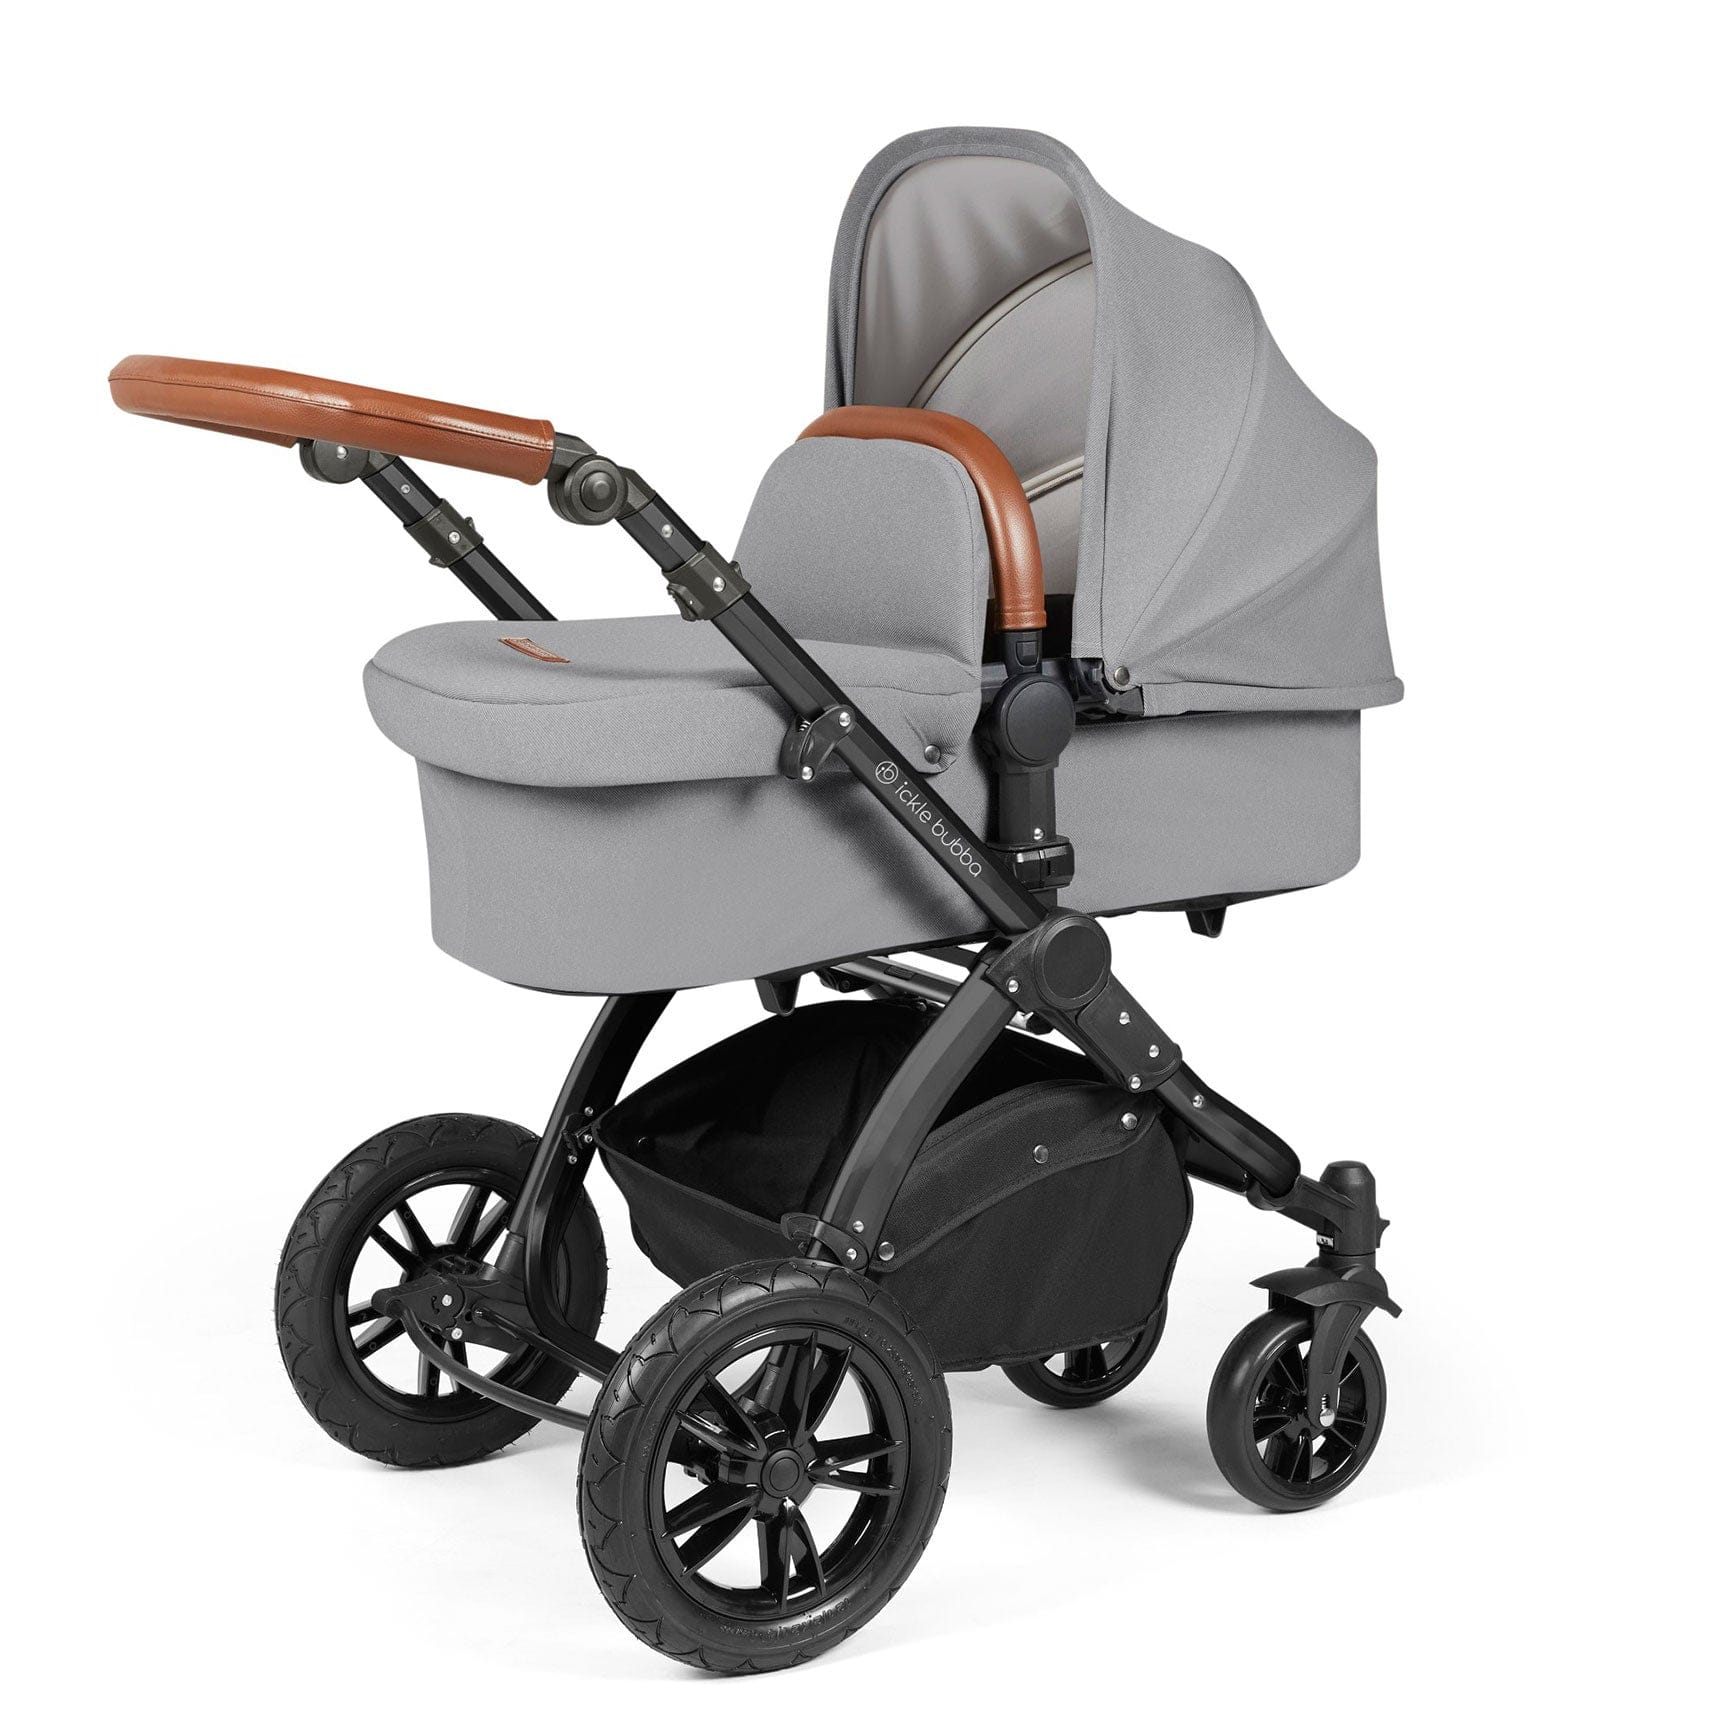 Ickle Bubba Stomp Luxe All-in-One Travel System with Isofix Base in  Black/Pearl Grey/Tan Travel Systems 10-011-300-211 5056515026467